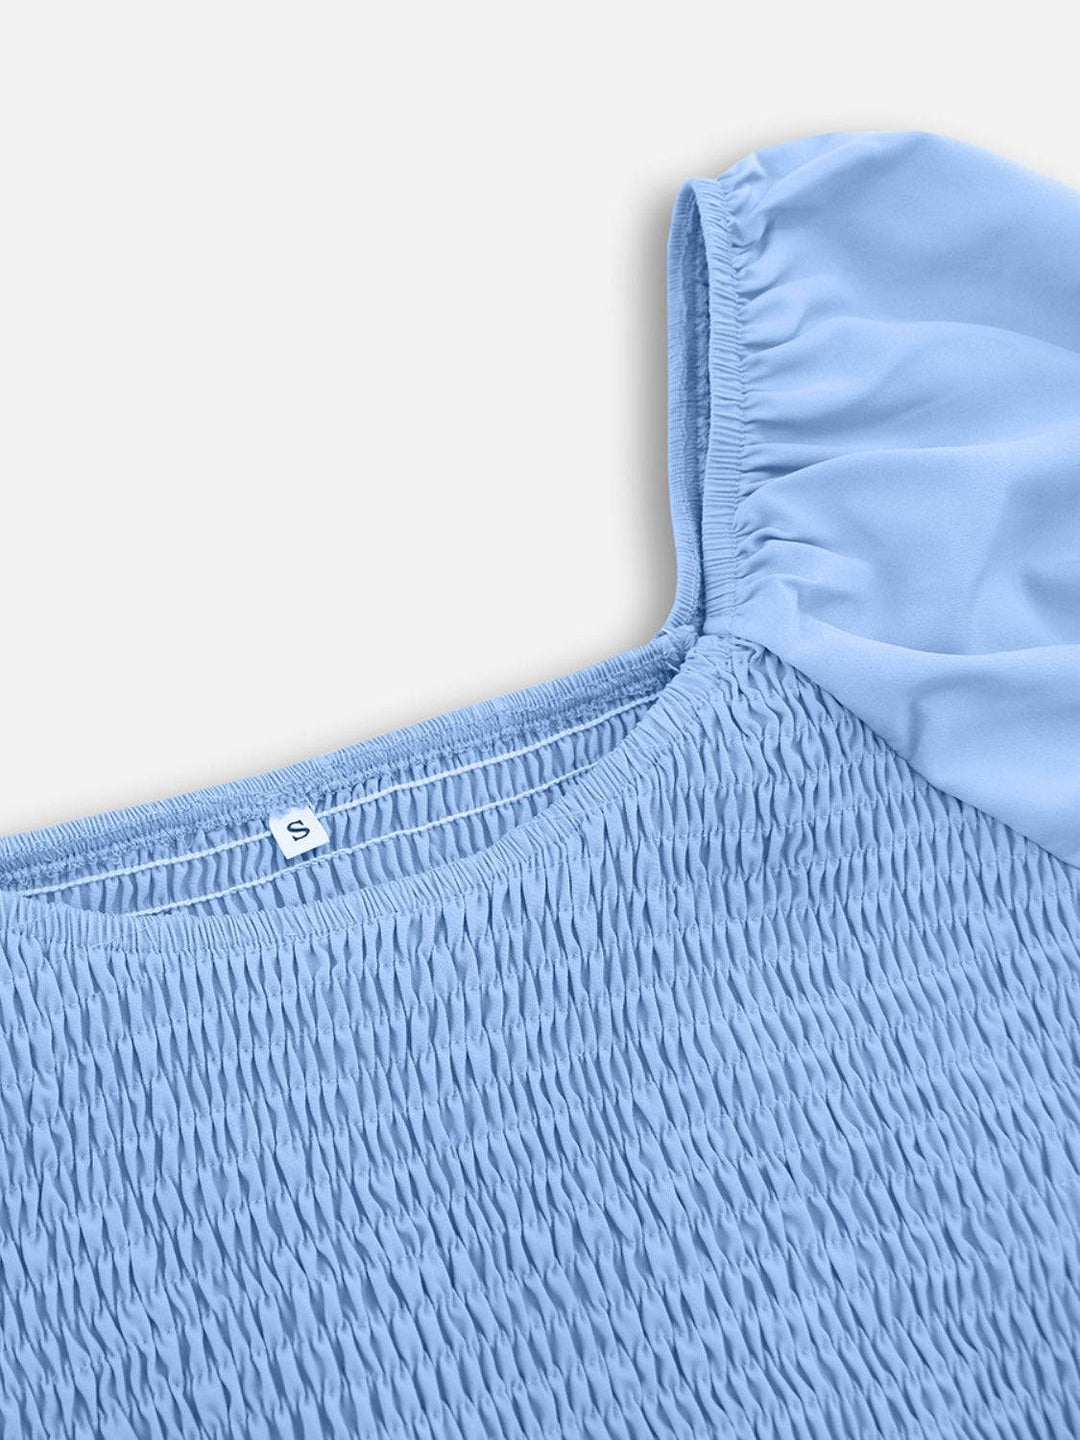 a close up of a blue shirt with a white background